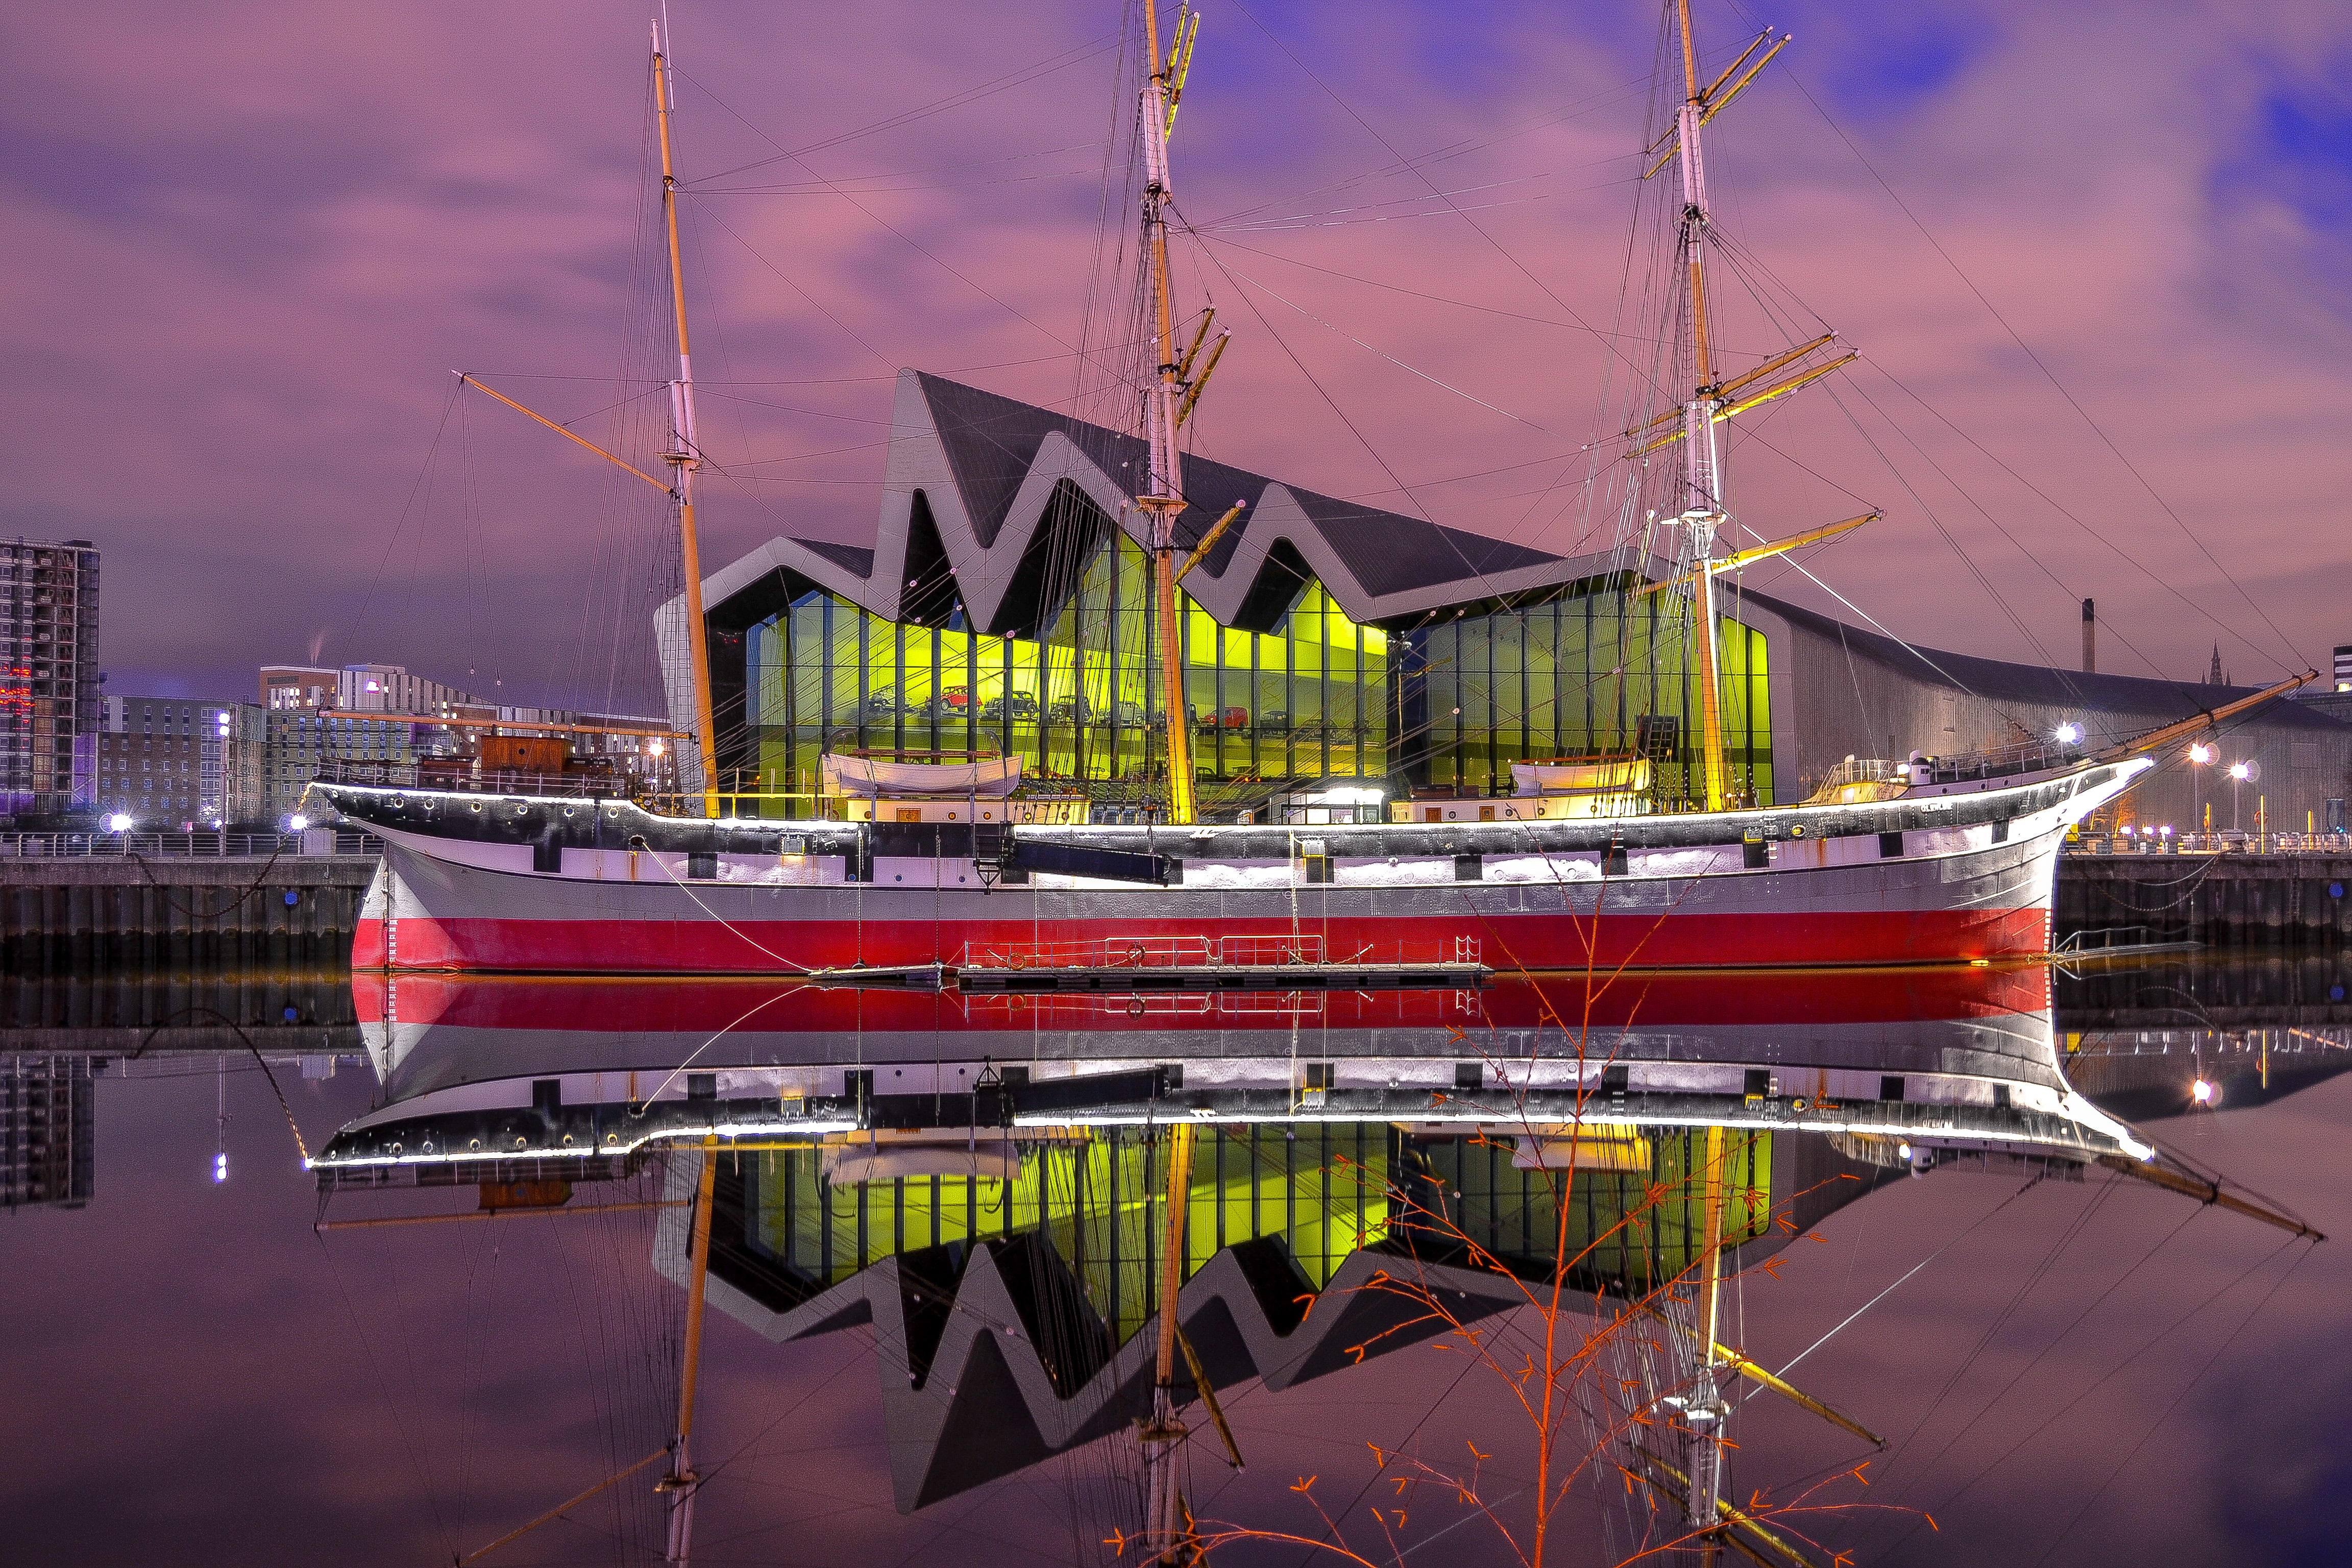 Photo Competition 2020 Overall Winner: Riverside Museum, Glasgow and Tall Ship Glenlee by Daniel Jones